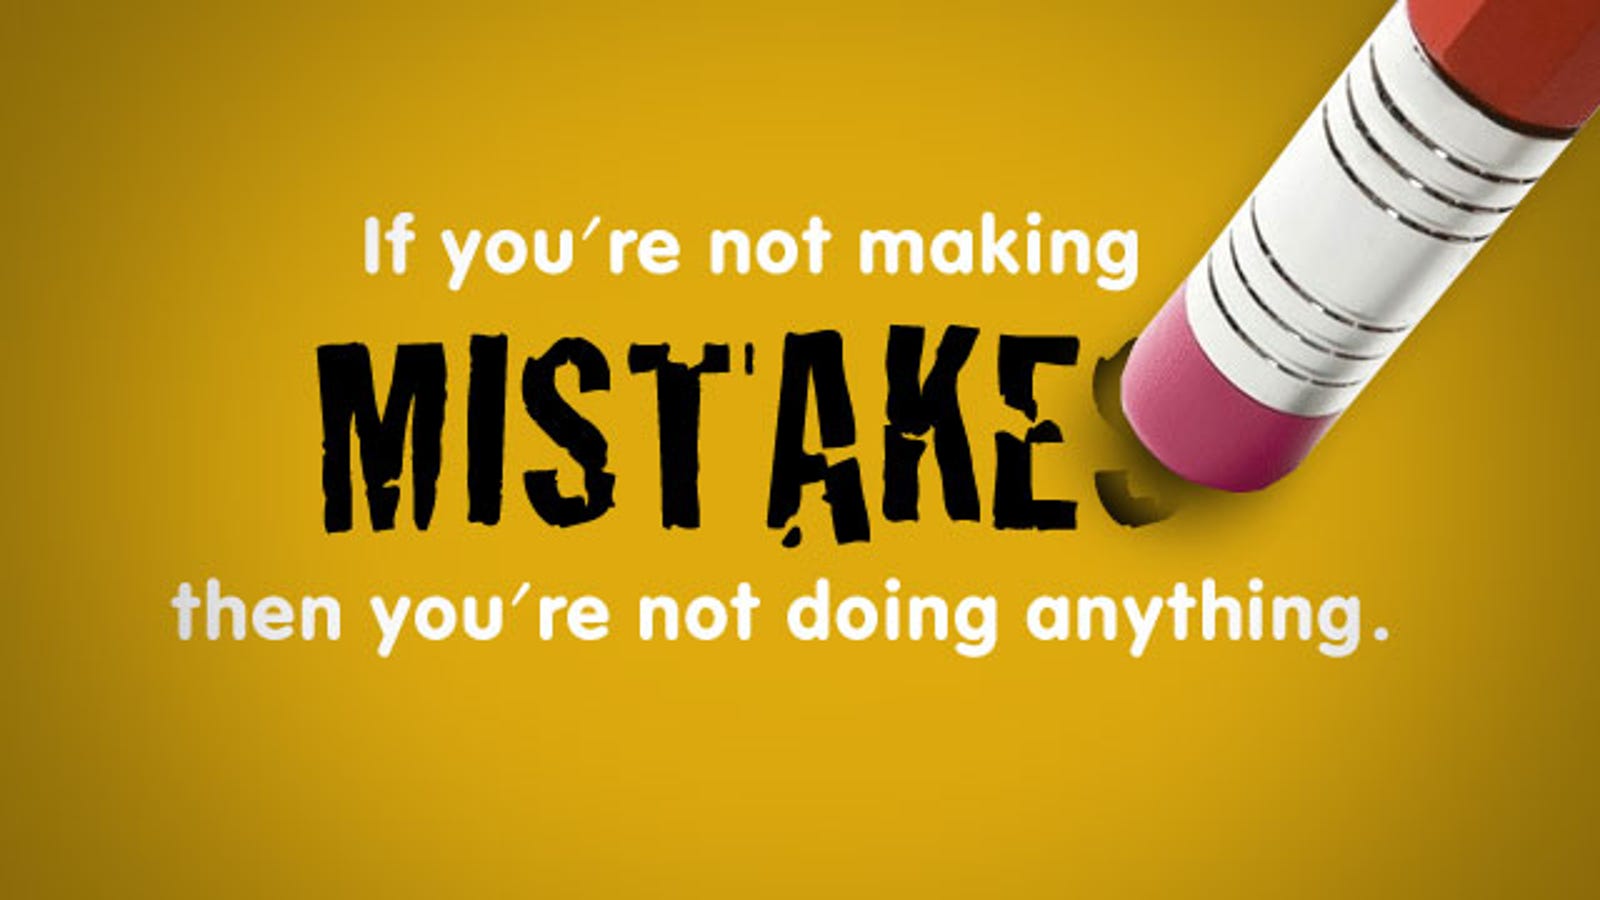 "If You're Not Making Mistakes, then You're Not Doing Anything."